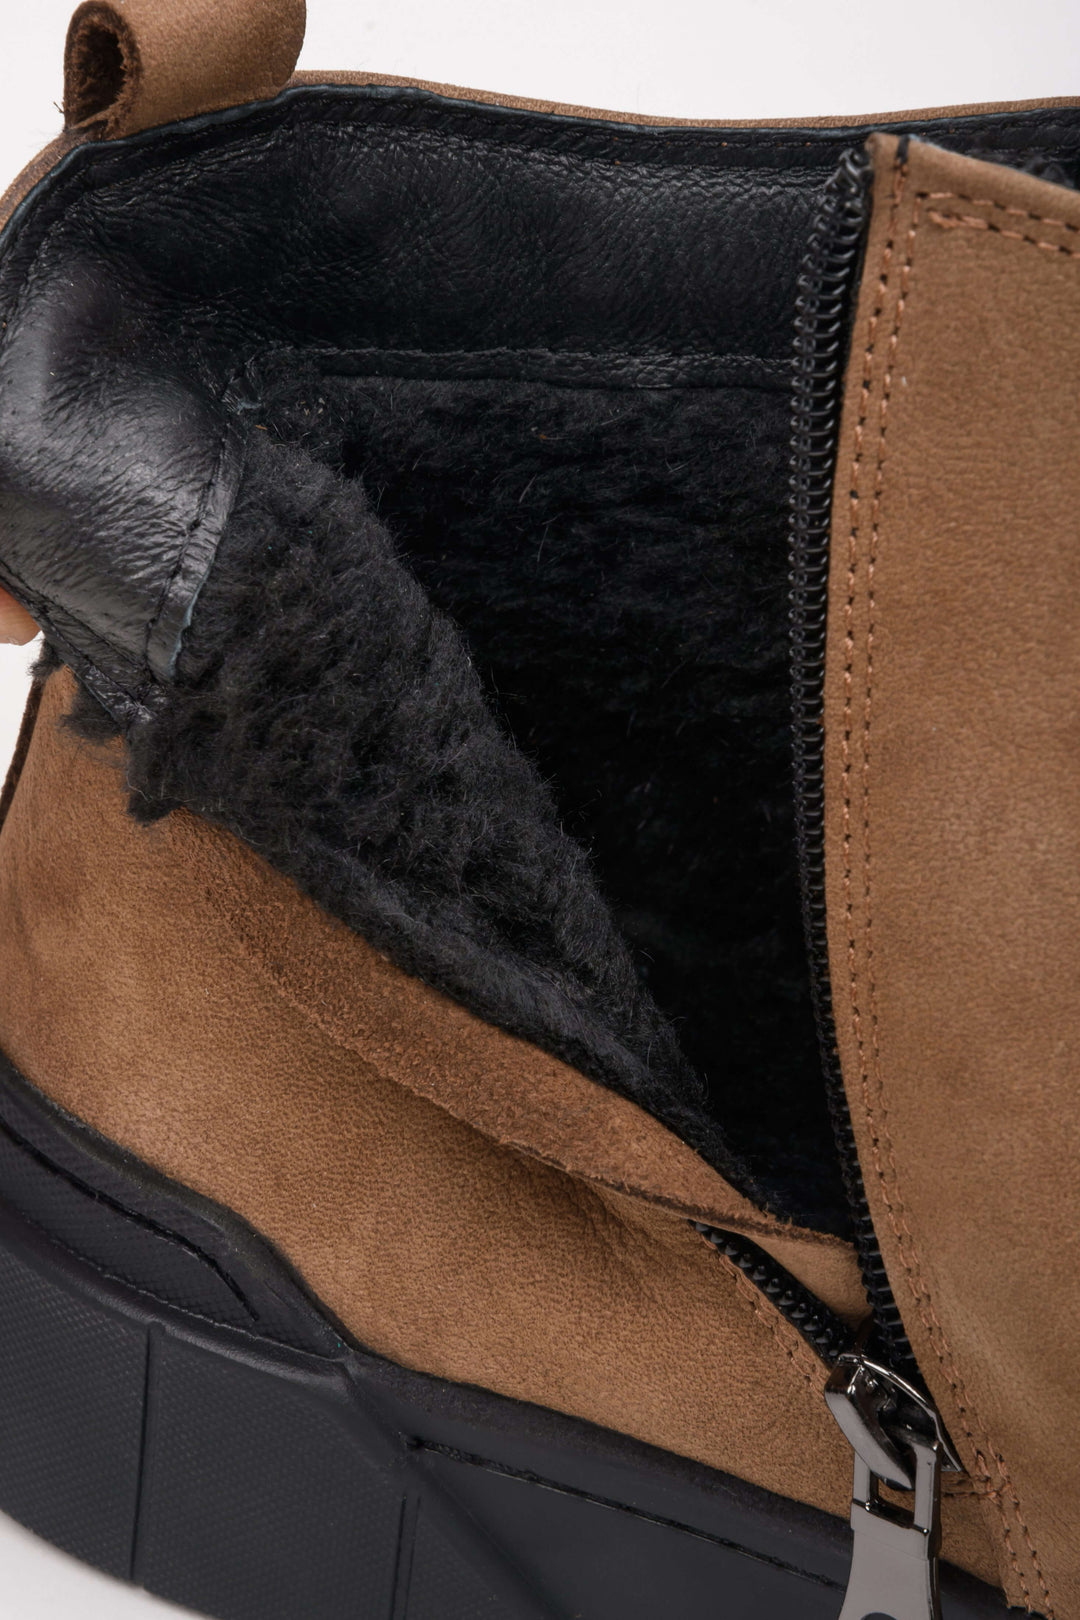 High-top men's sneakers in brown - close-up on the shoe's padding.